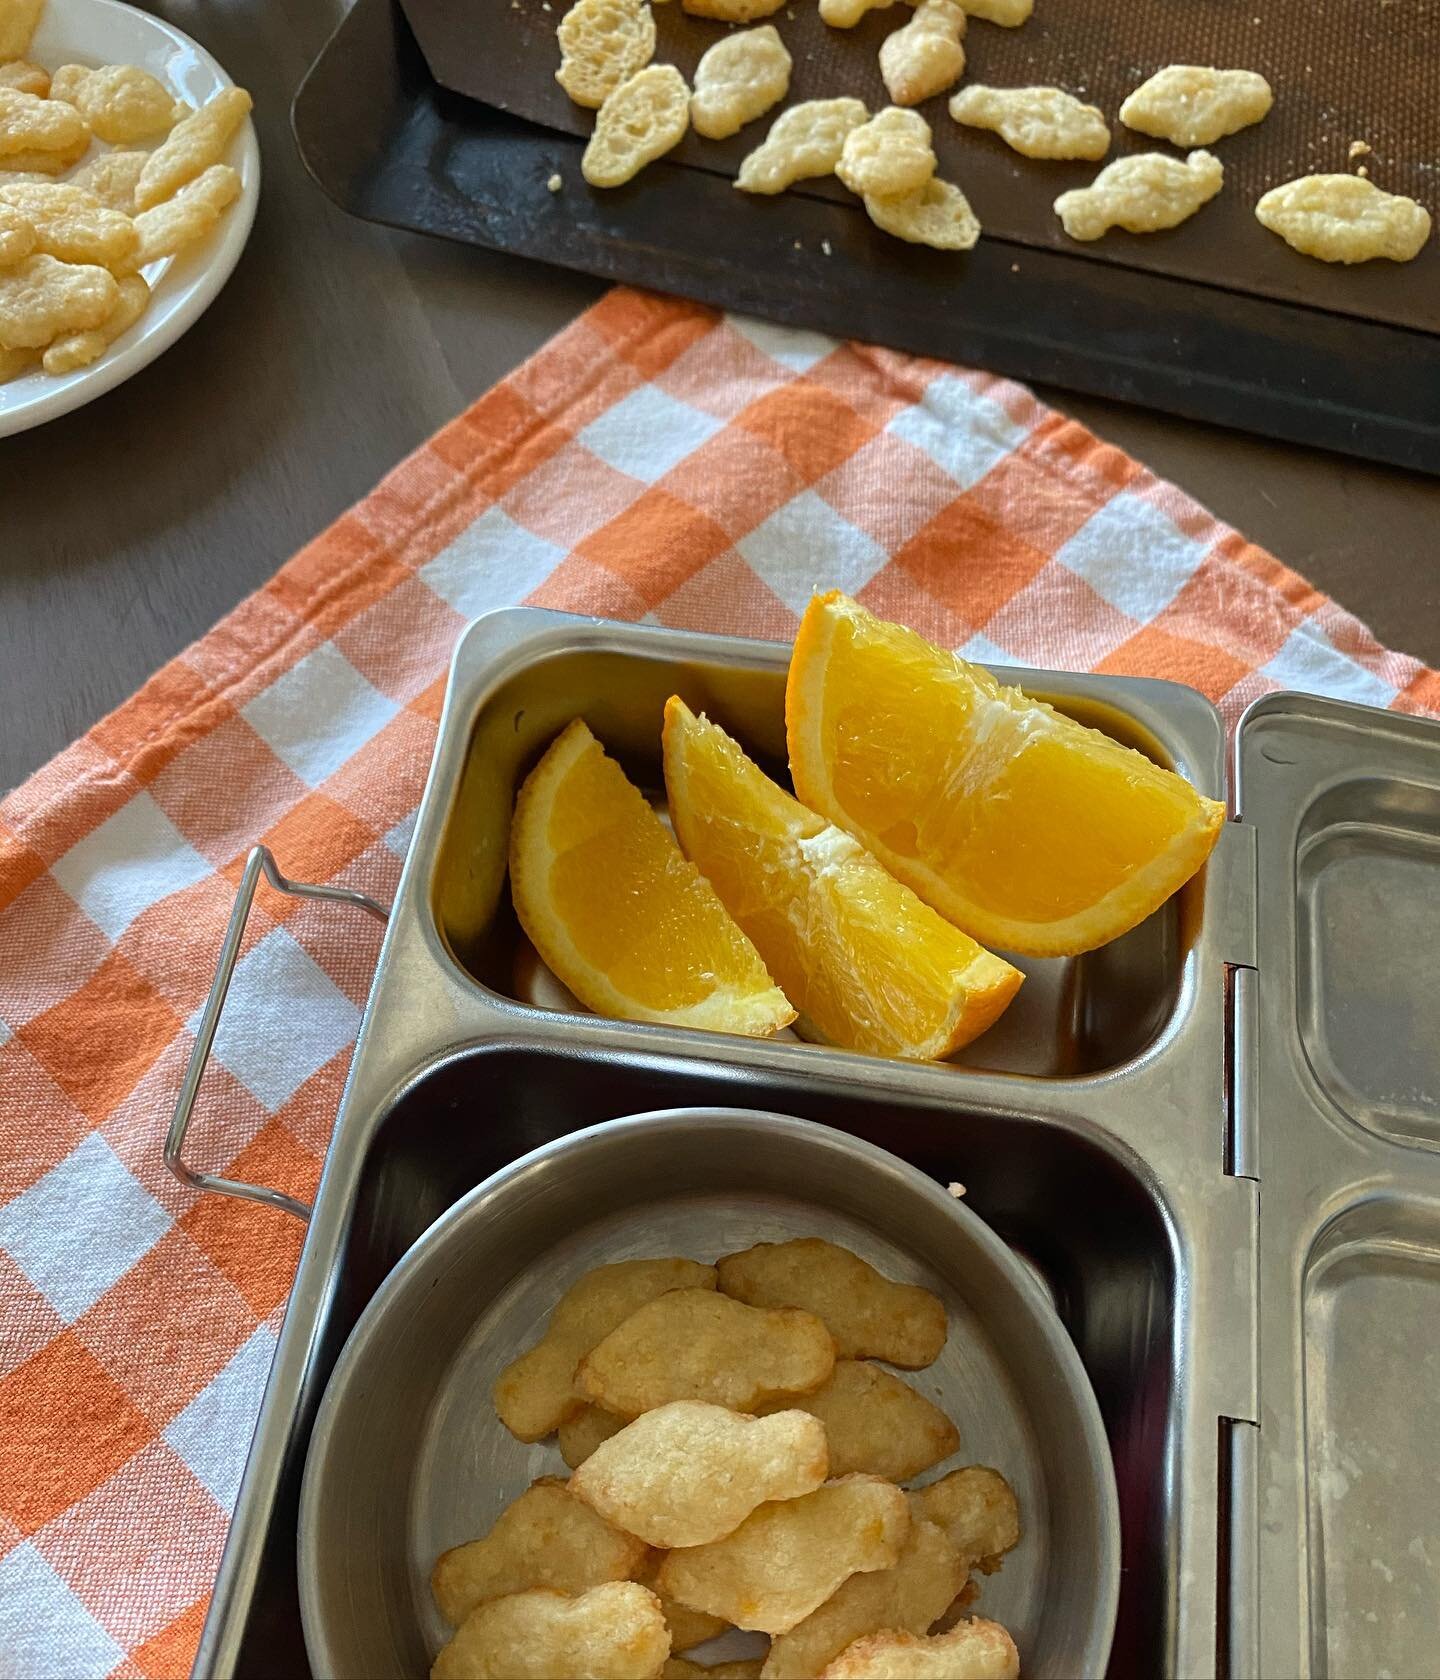 Real Food Goldfish Crackers
.
It&rsquo;s finally here! Roll &amp; cut, goldfish style crackers with 4 ingredients. (there&rsquo;s also a gluten-free option). 
.
In addition to the recipe, I break down some of my favorite food industry culprits includ